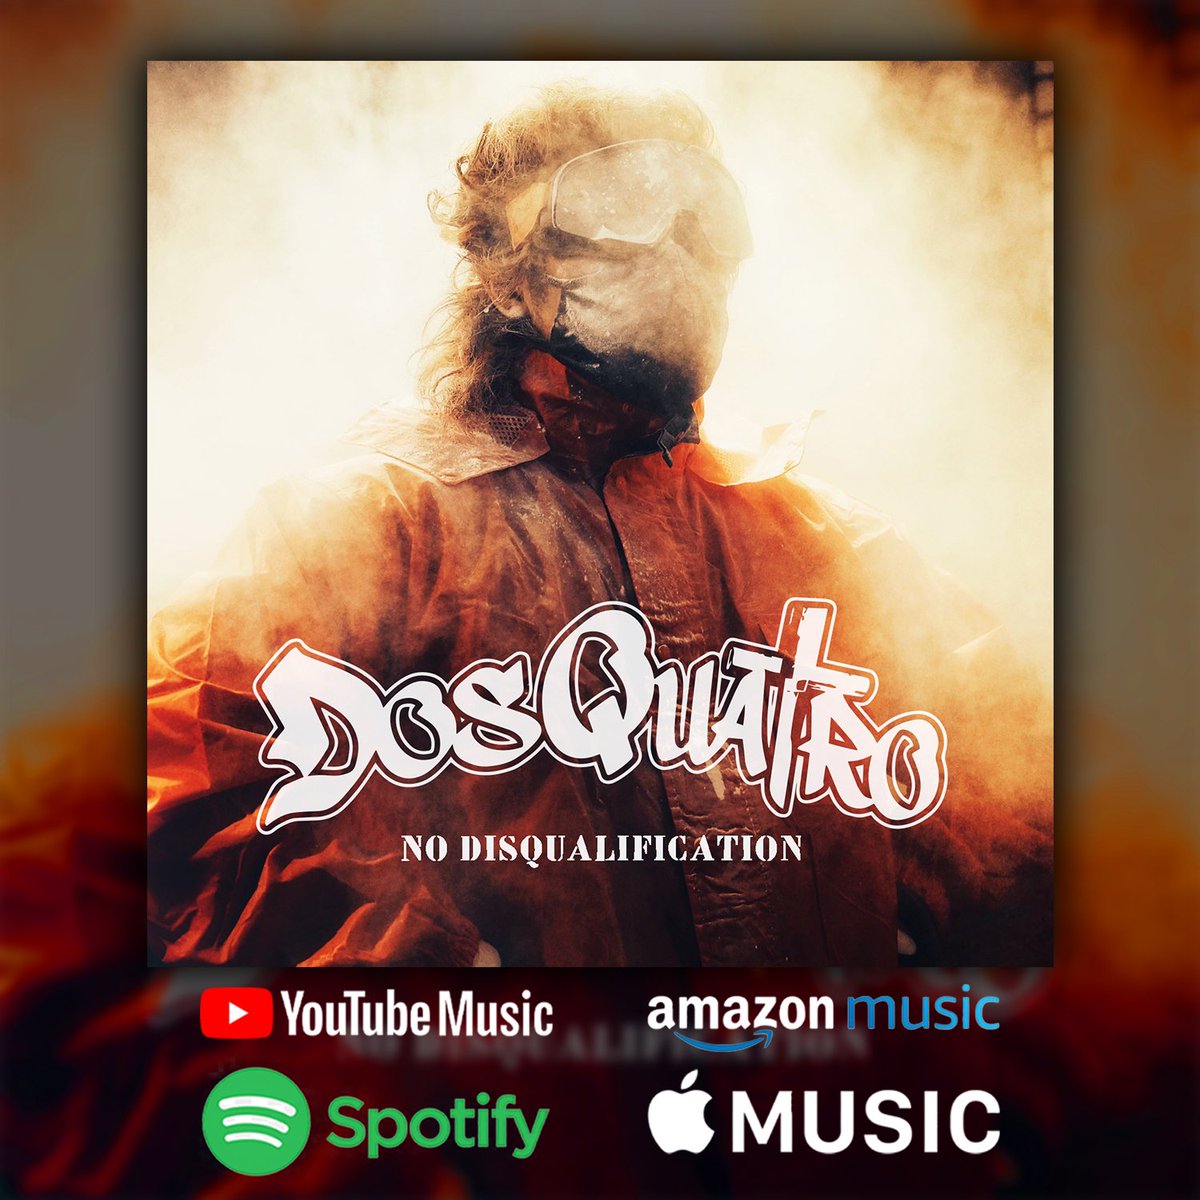 💥24 ANNOUNCEMENT💥 Our 1st single 'No Disqualification' is out on streaming now!! Enjoy it, Spread it, Fuck it!! linkco.re/GDsRXSeu #dosquatro